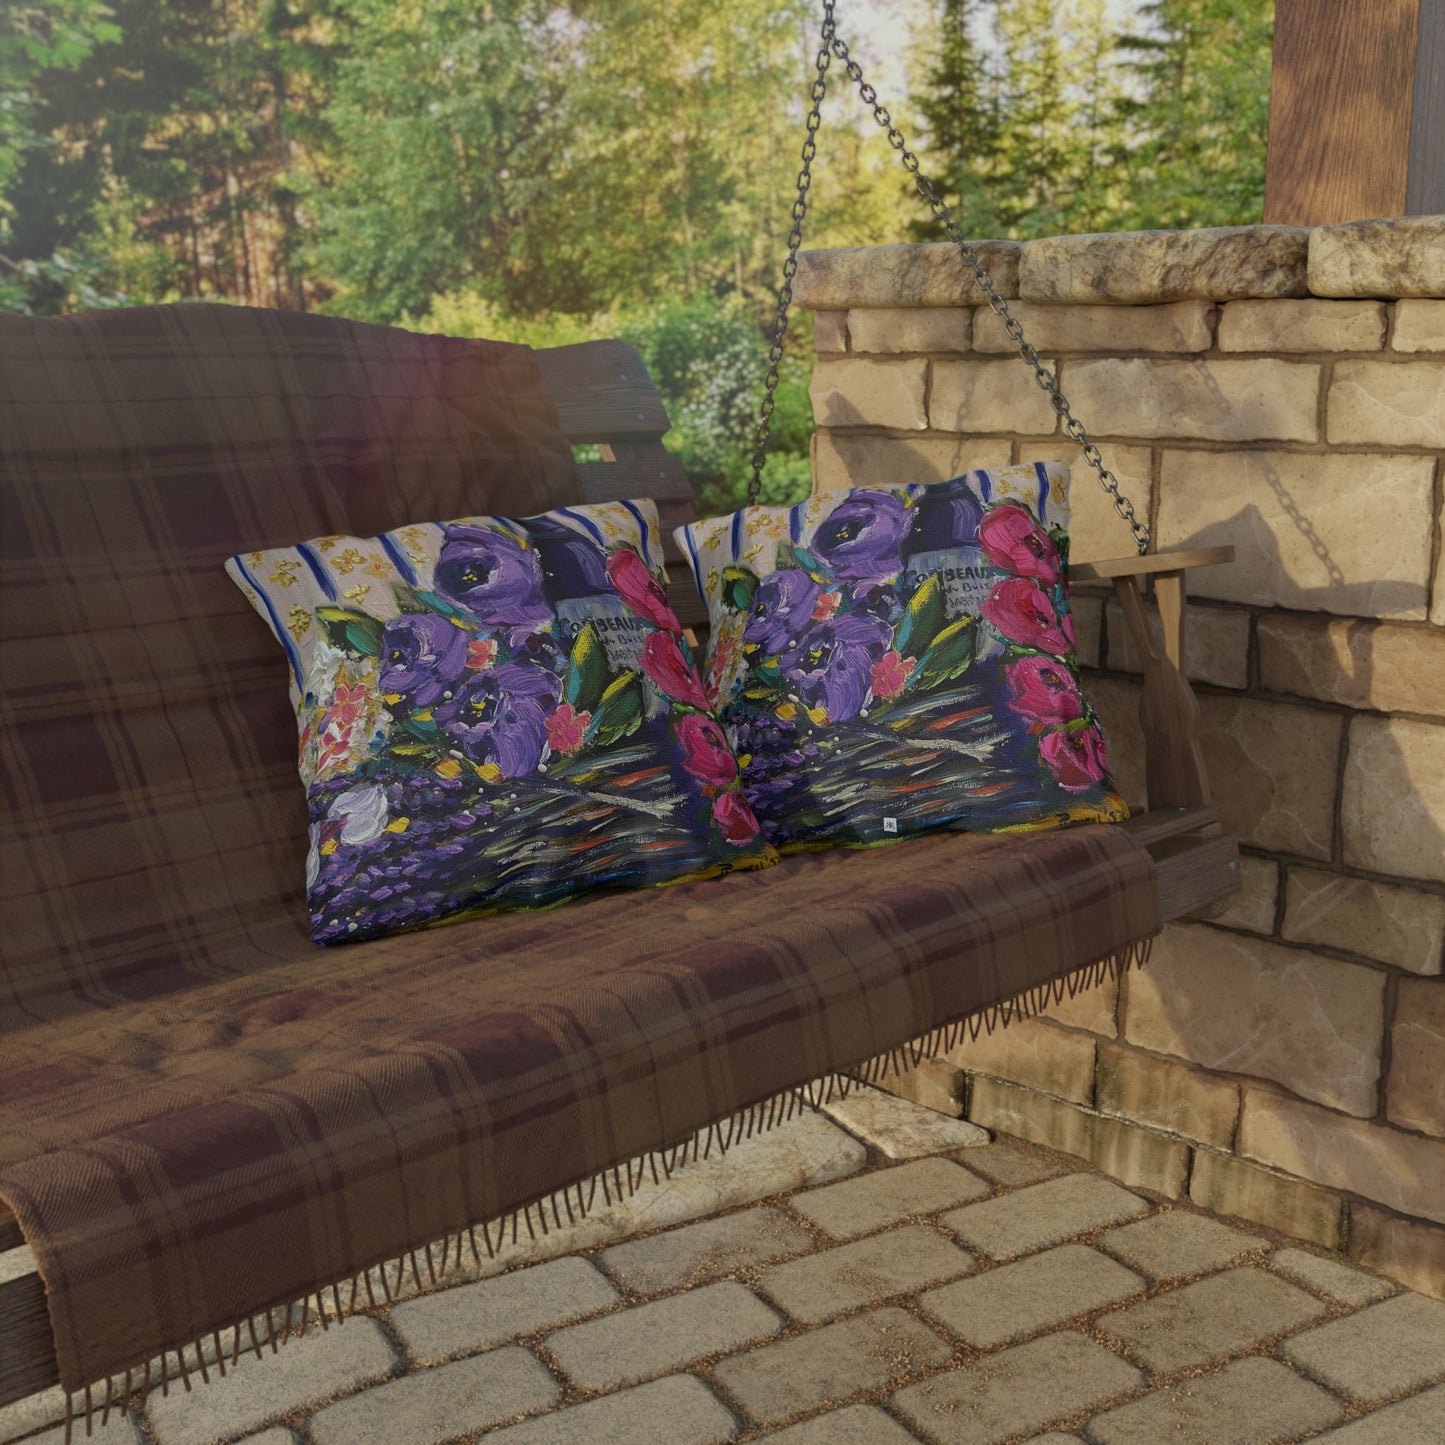 Corbeaux Wine and Lavender Outdoor Pillows